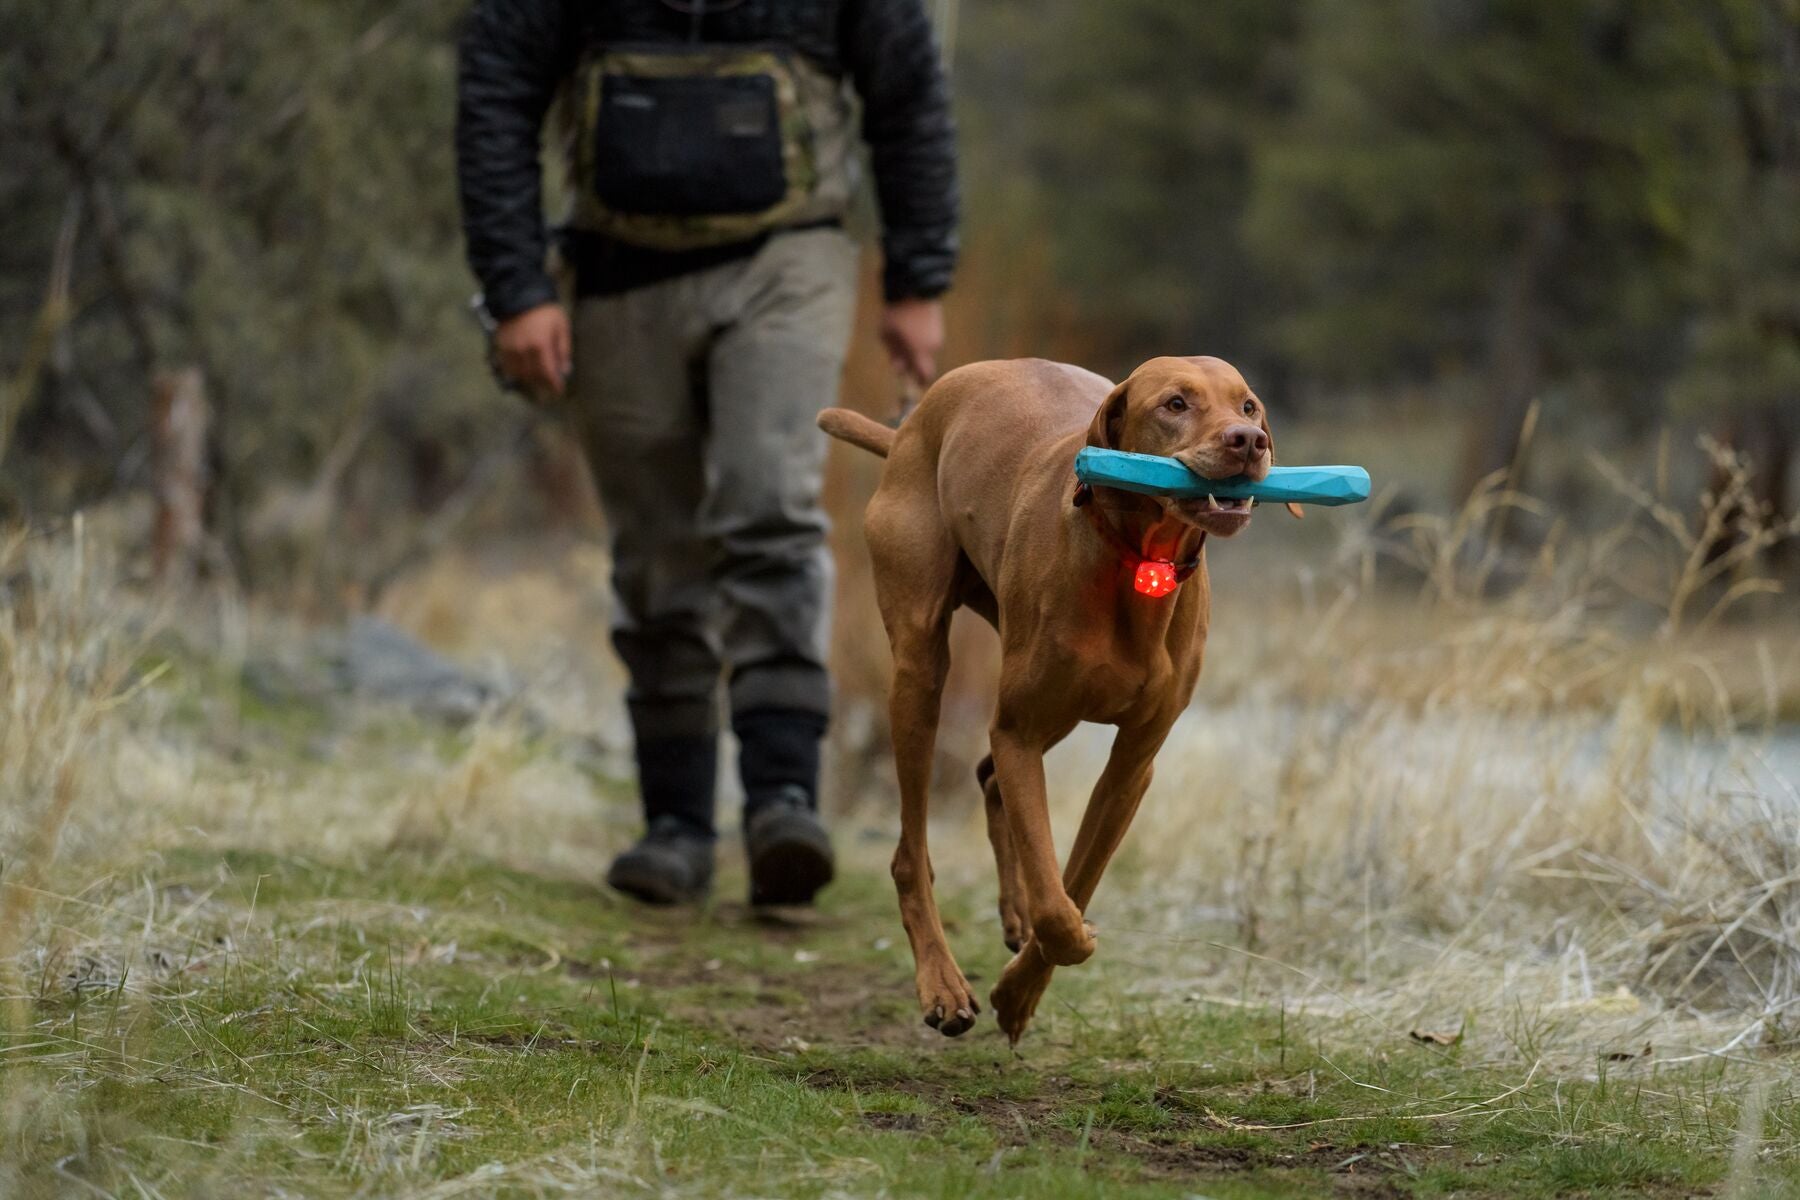 A dog wears The Beacon™ Safety Light while running with a toy in his mouth.